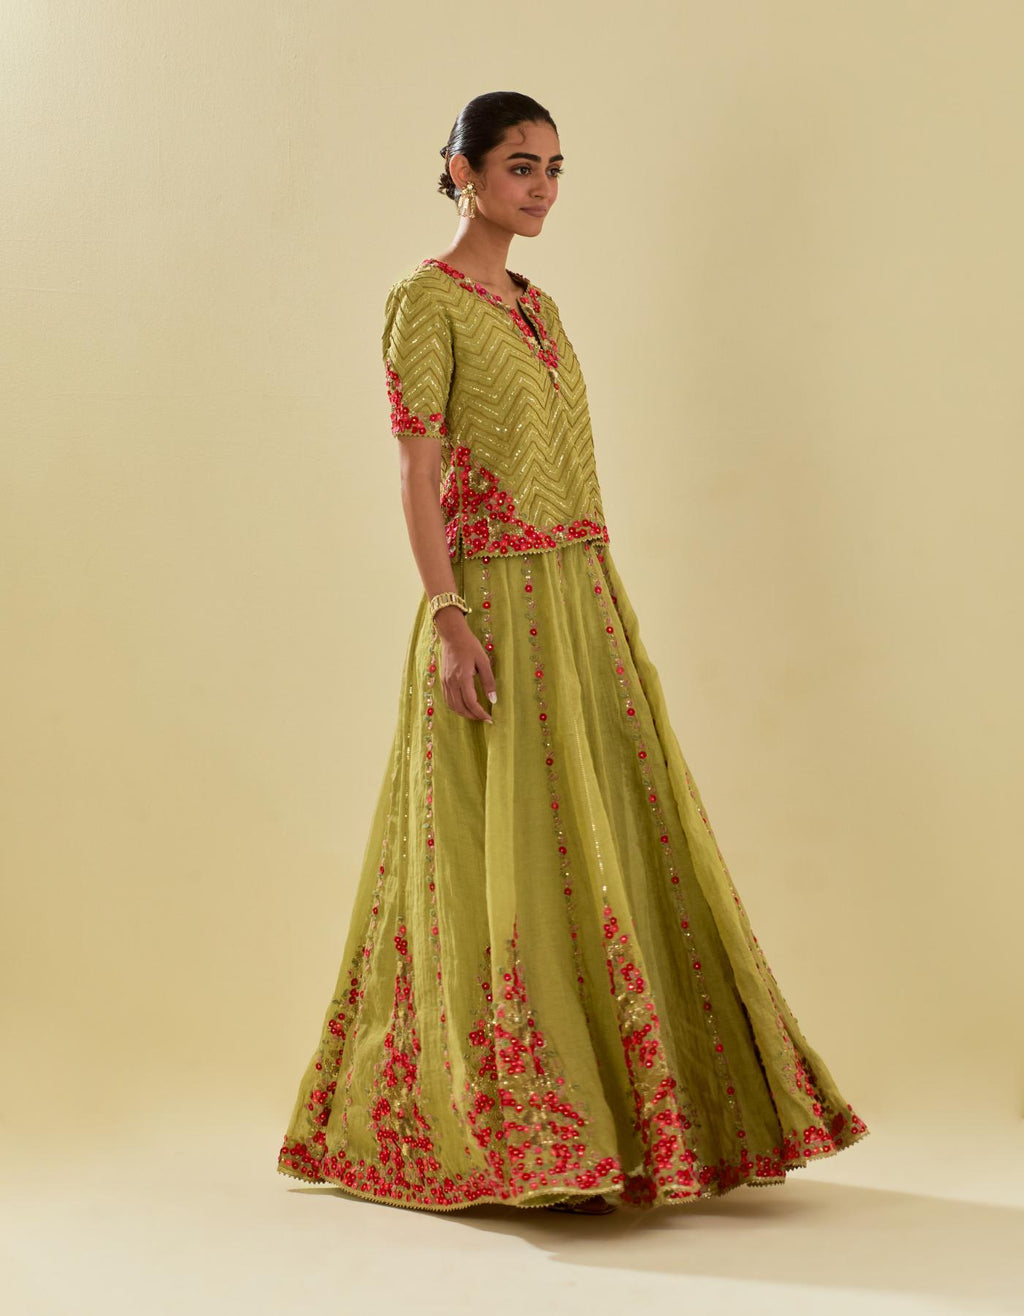 Green tissue chanderi short top set with delicate hand cut silk flower embroidery, highlighted with gold sequins and beads.